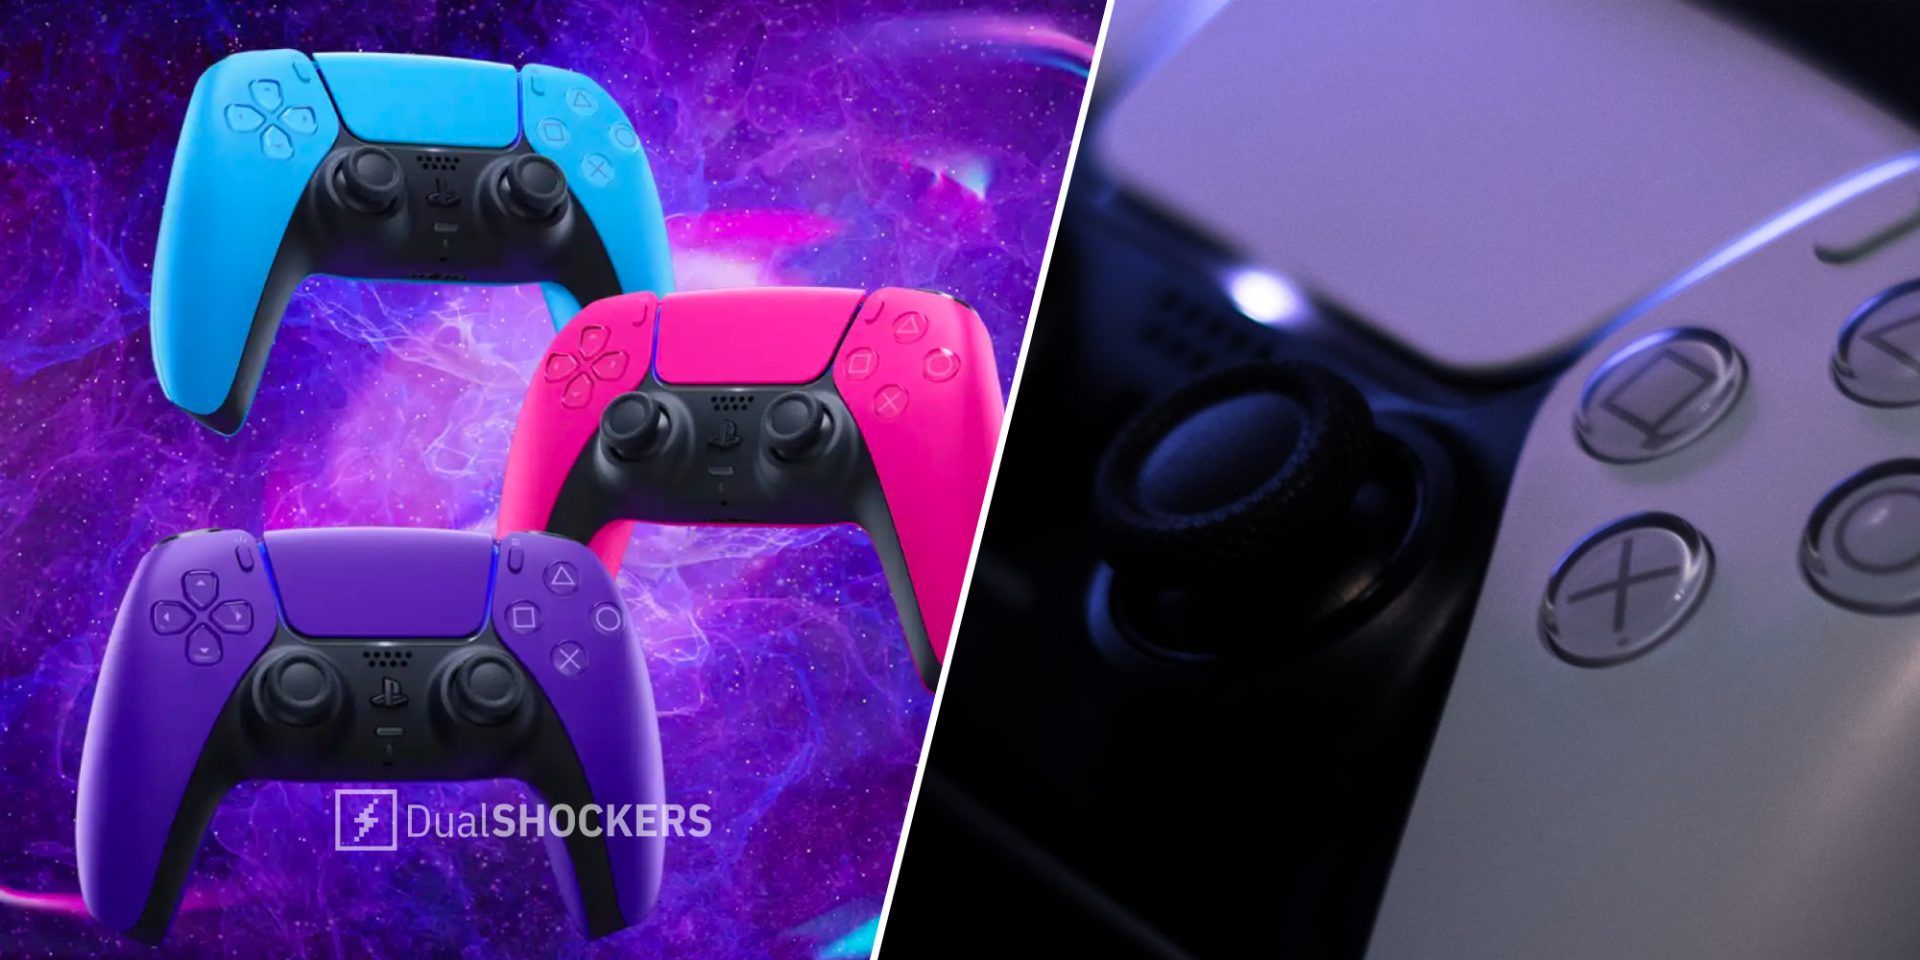 Playstation 5 DualSense controllers in blue, pink, and purple on left, PS5 DualSense controller in white on right